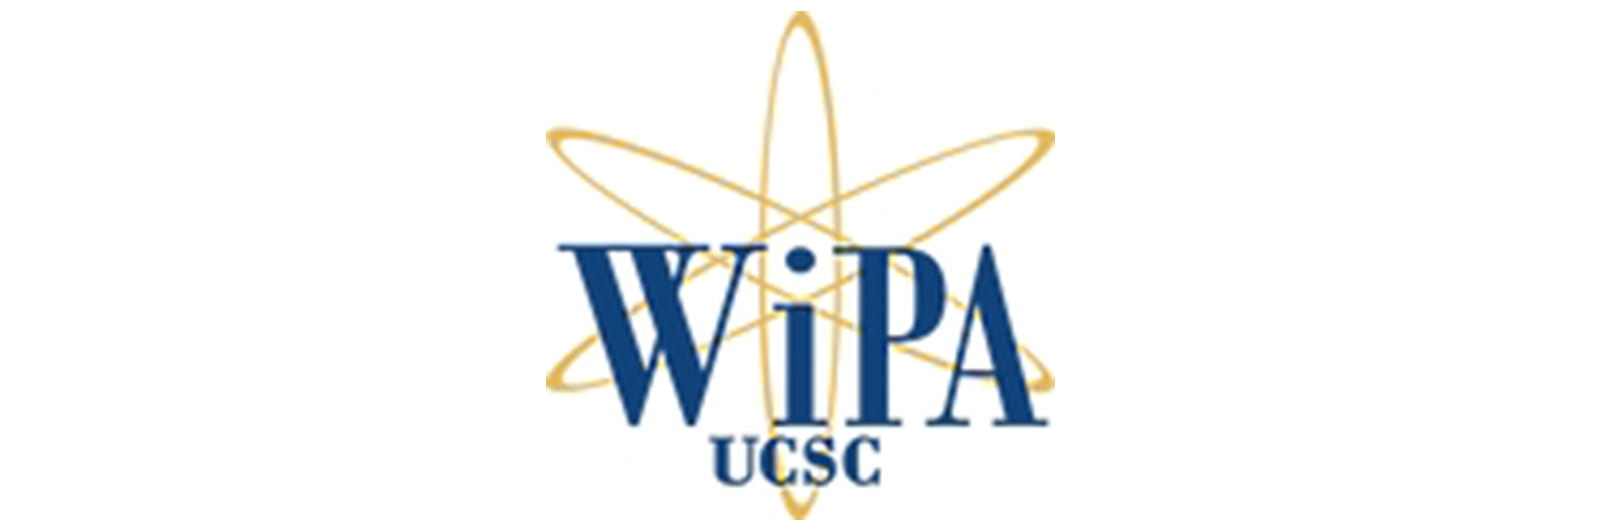 Banner image reads "WiPA UCSC" with the image of an atom in the background.